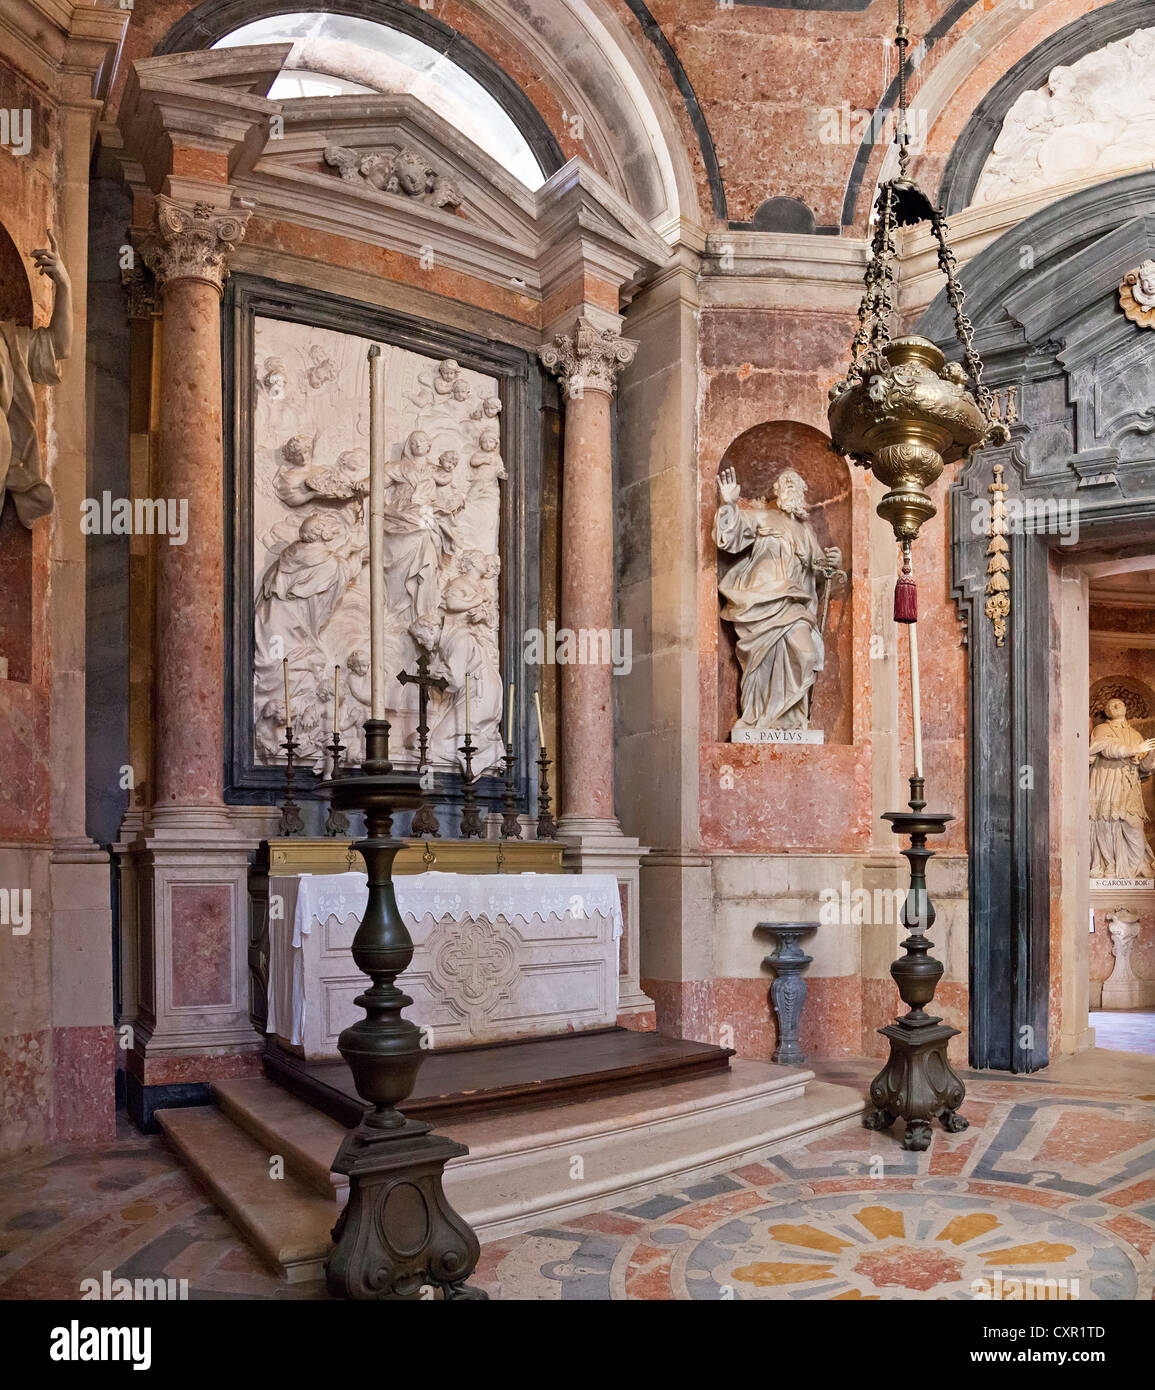 Chapel with Saint Paul statue in the side aisle of the Basilica. Mafra Palace and Convent in Portugal. Baroque architecture. Stock Photo